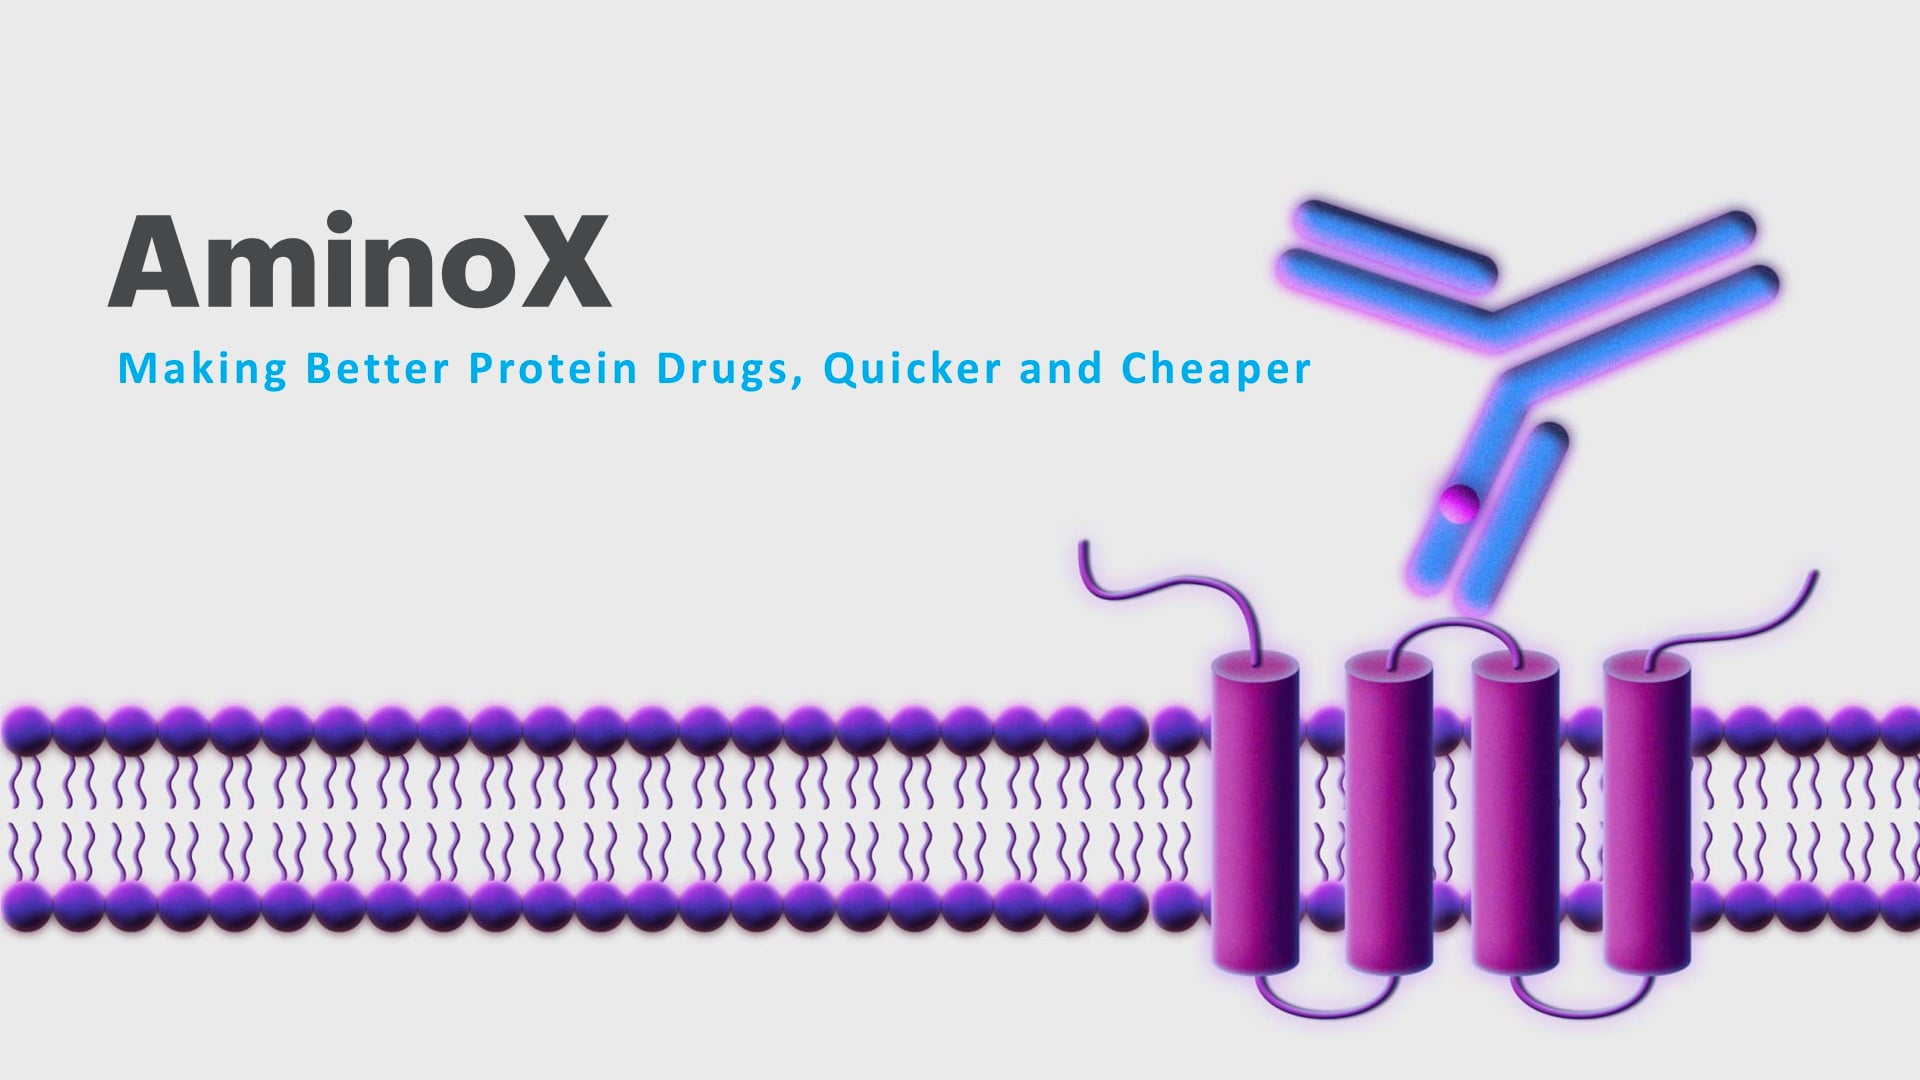 AminoX: Making Better Protein Drugs, Quicker and Cheaper